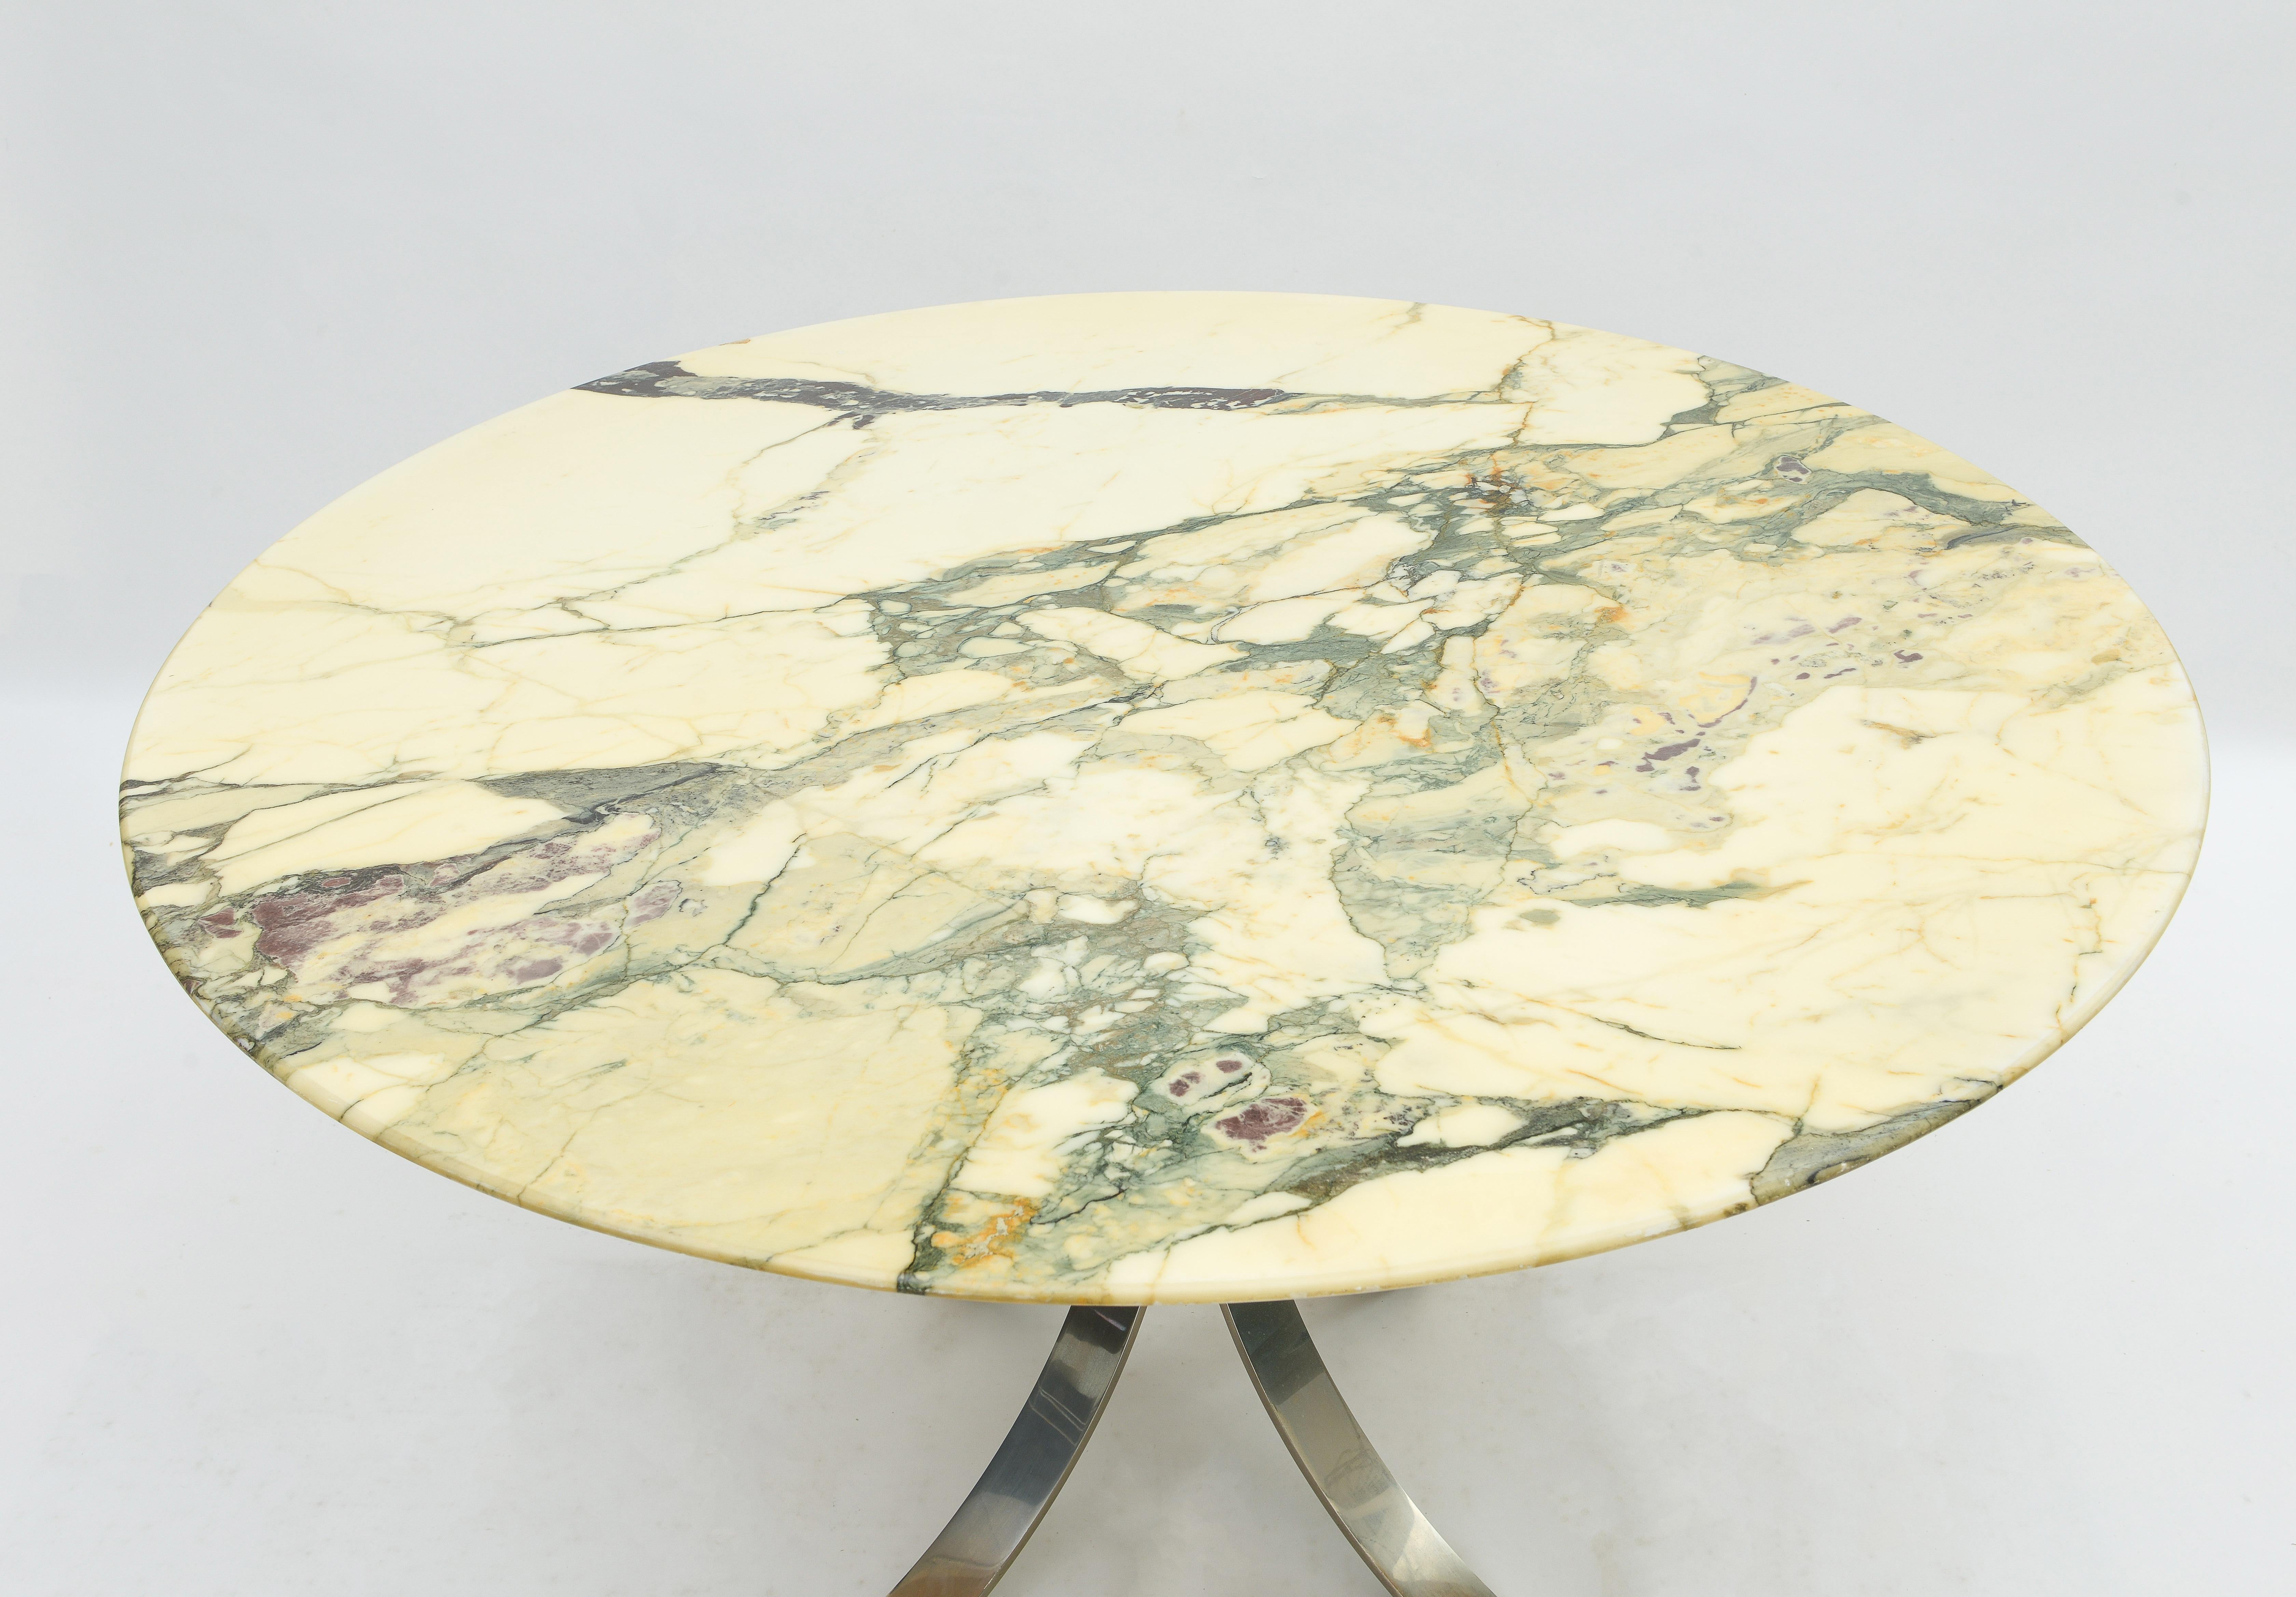 Beautiful condition vintage veined marble table with incredible veining. Chrome pedestal base.
Perfect for any decor. Osvaldo Borsani, beautiful marble.